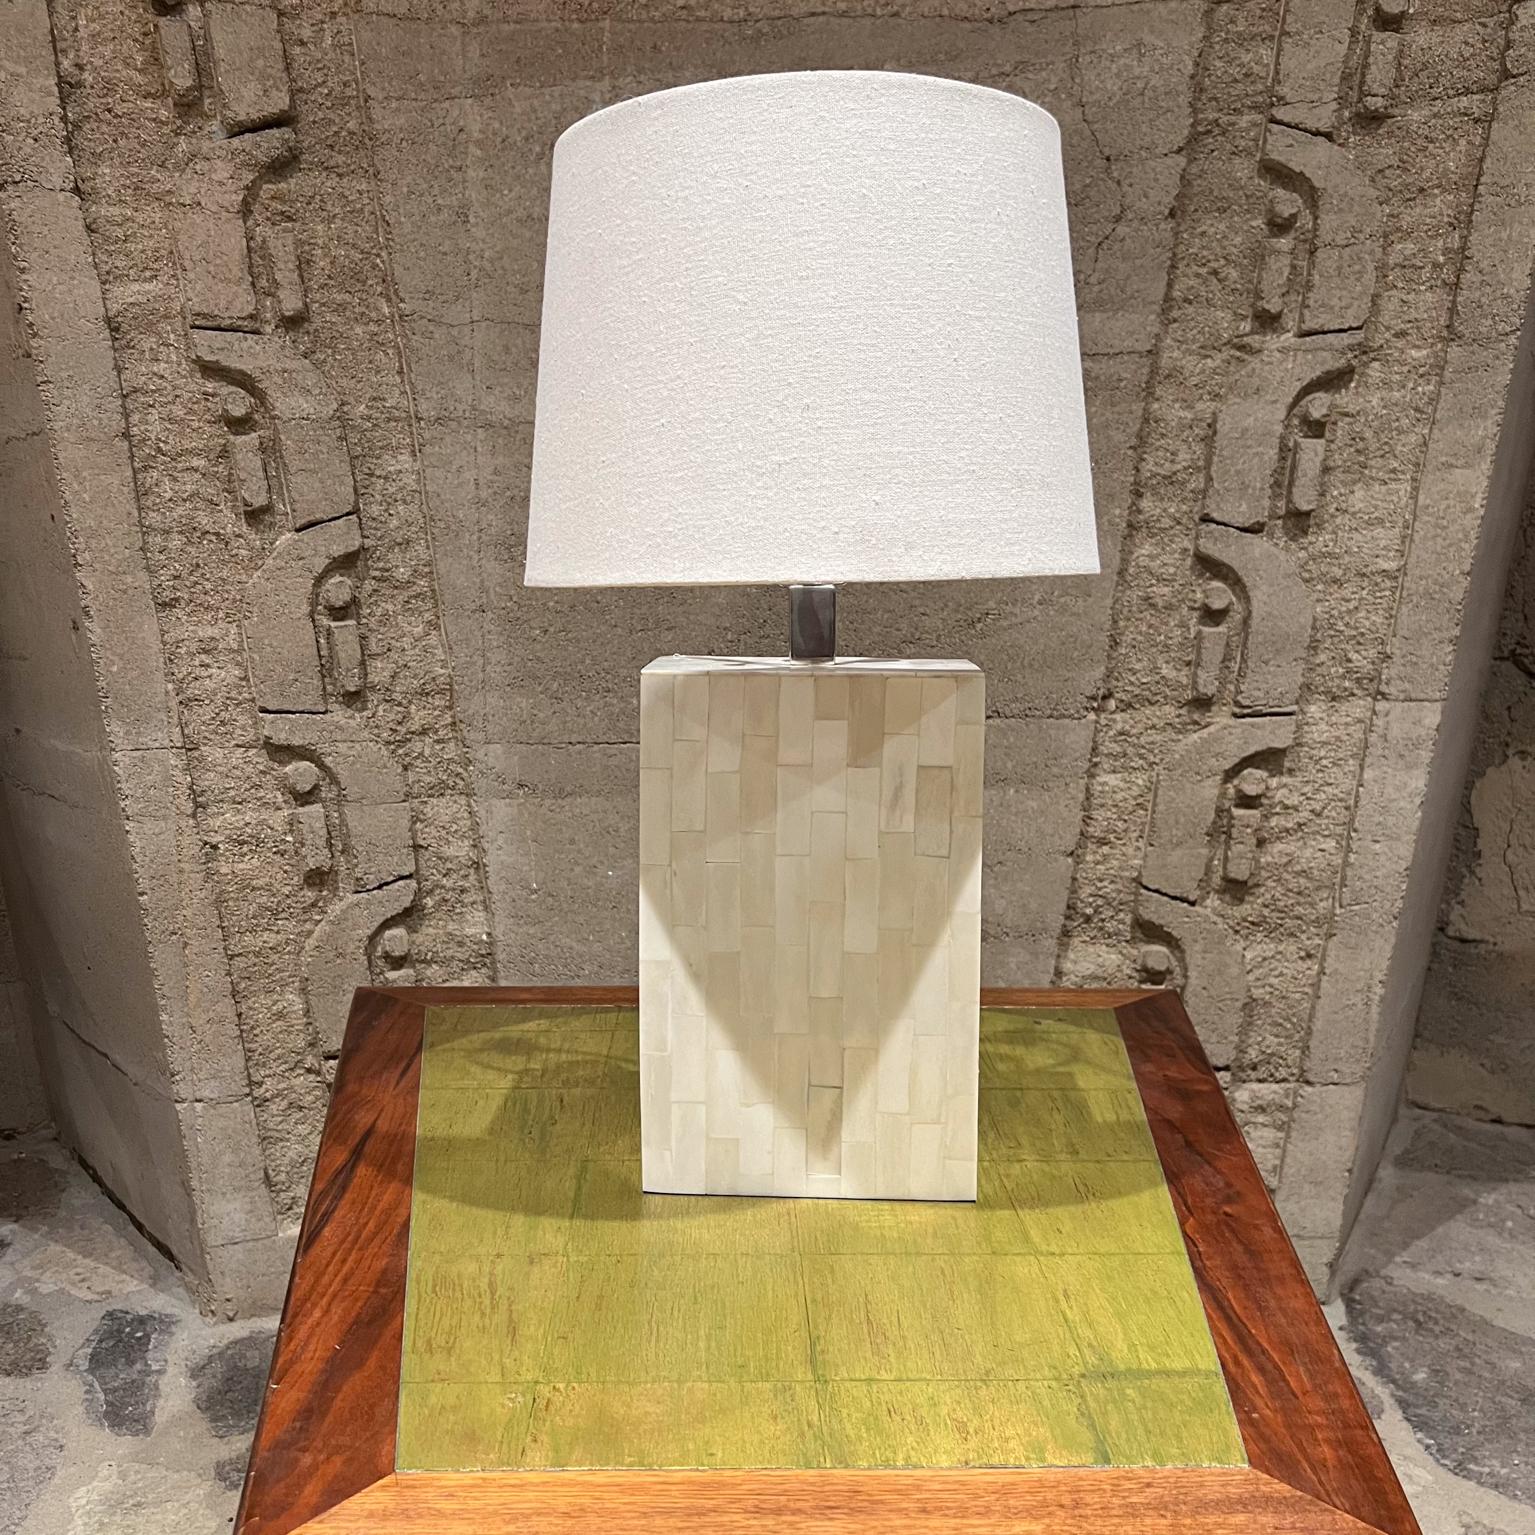 1970s Tessellated Bone Table Lamp Enrique Garcel Colombia
17 h to socket 24 h to finial 7.75 w x 4.25d
Enrique Garcel (in the style of Karl Springer + Maitland Smith)
Preowned original unrestored vintage condition
No shade is included
Refer to all